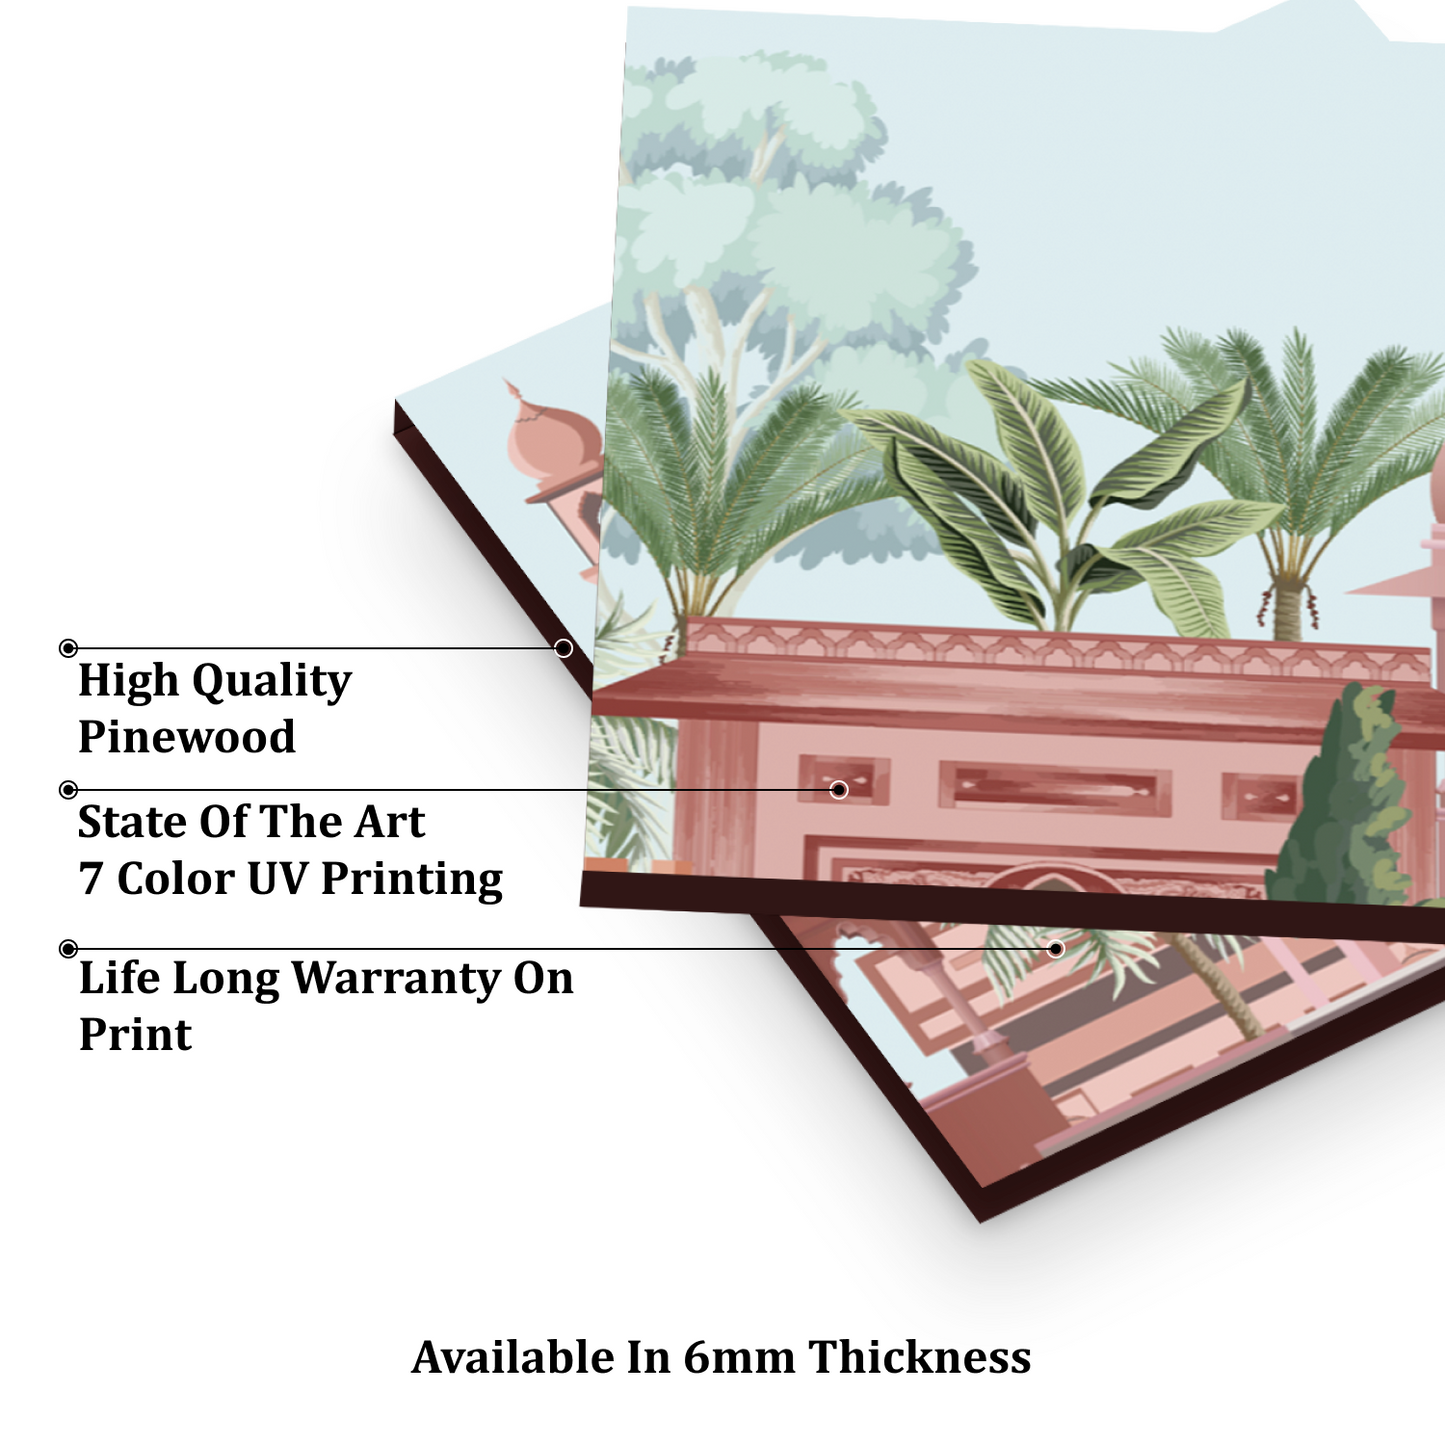 Mughal Garden and Palace Traditional Wood Print Wooden Wall Tiles Set